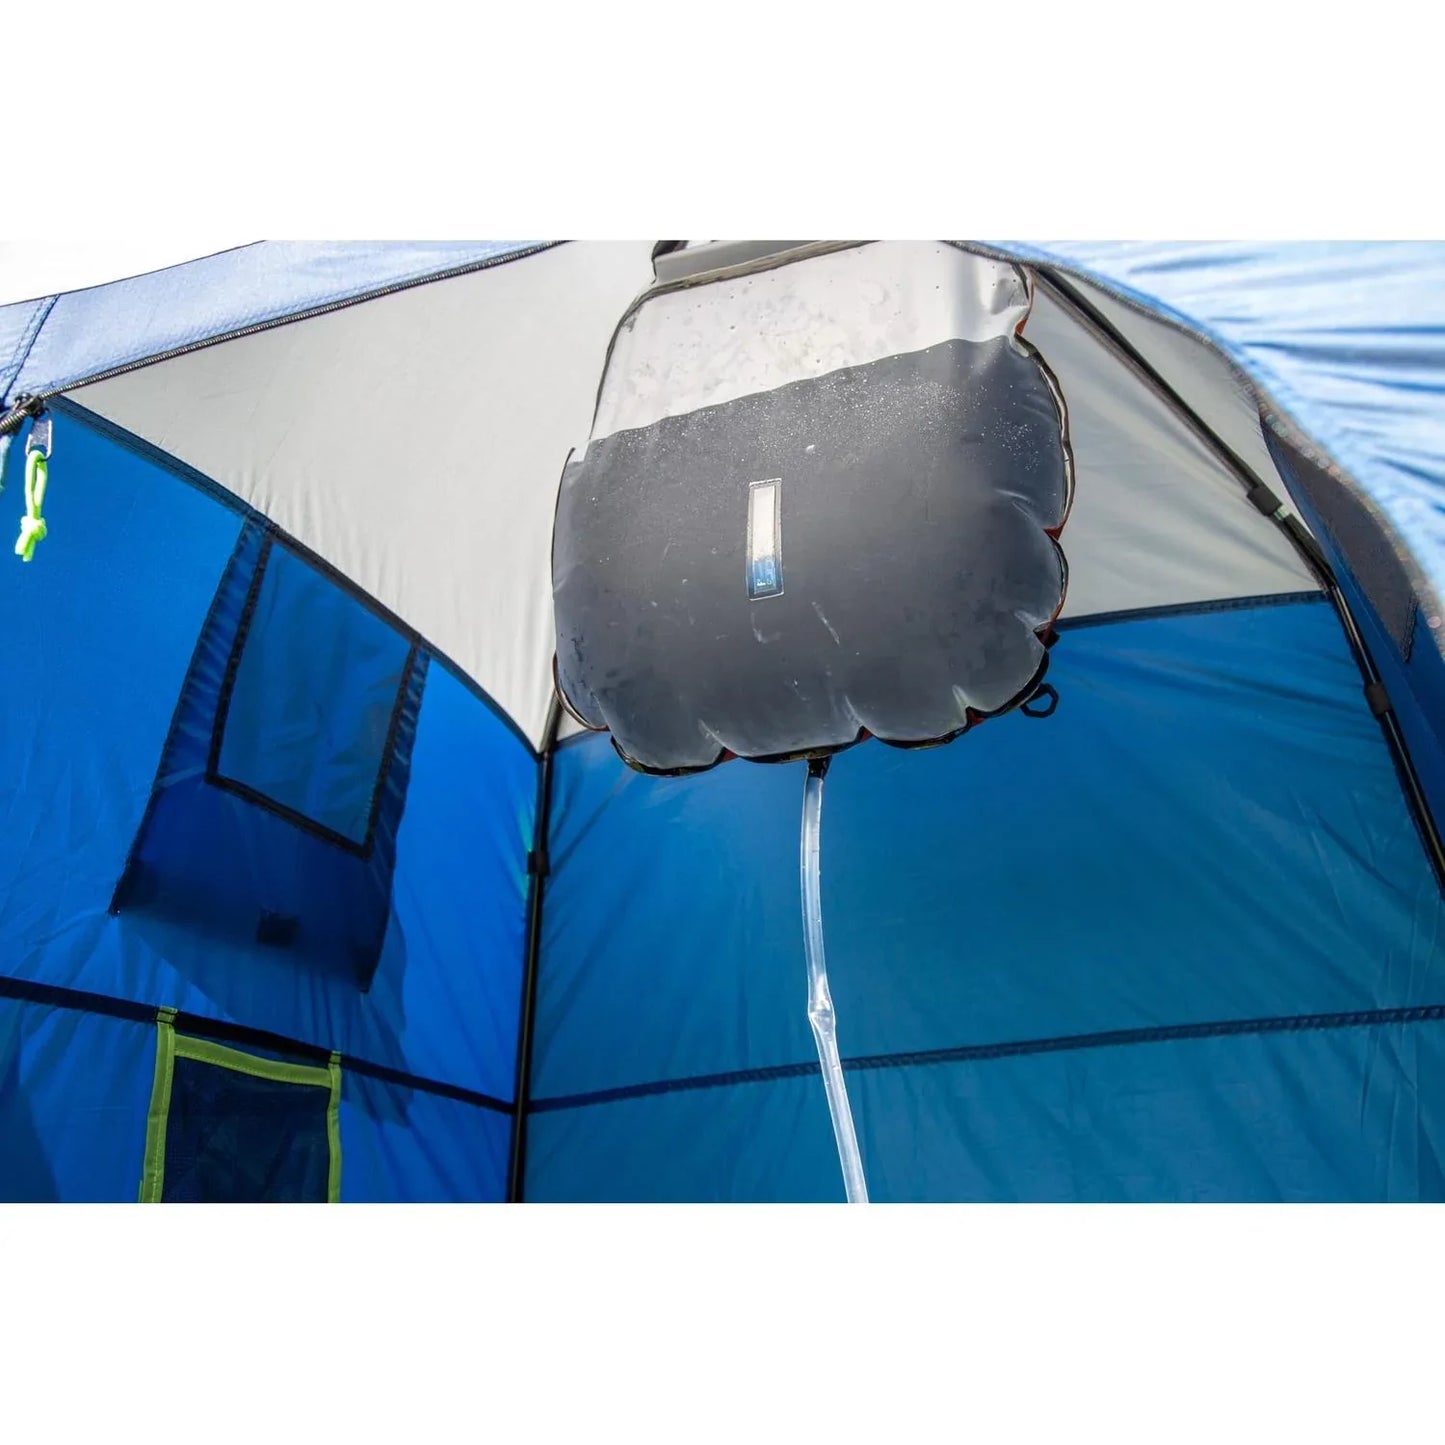 Camping Kingfisher Shower Tent W: 1200mm, H: 2100mm, D: 1200mm Blue